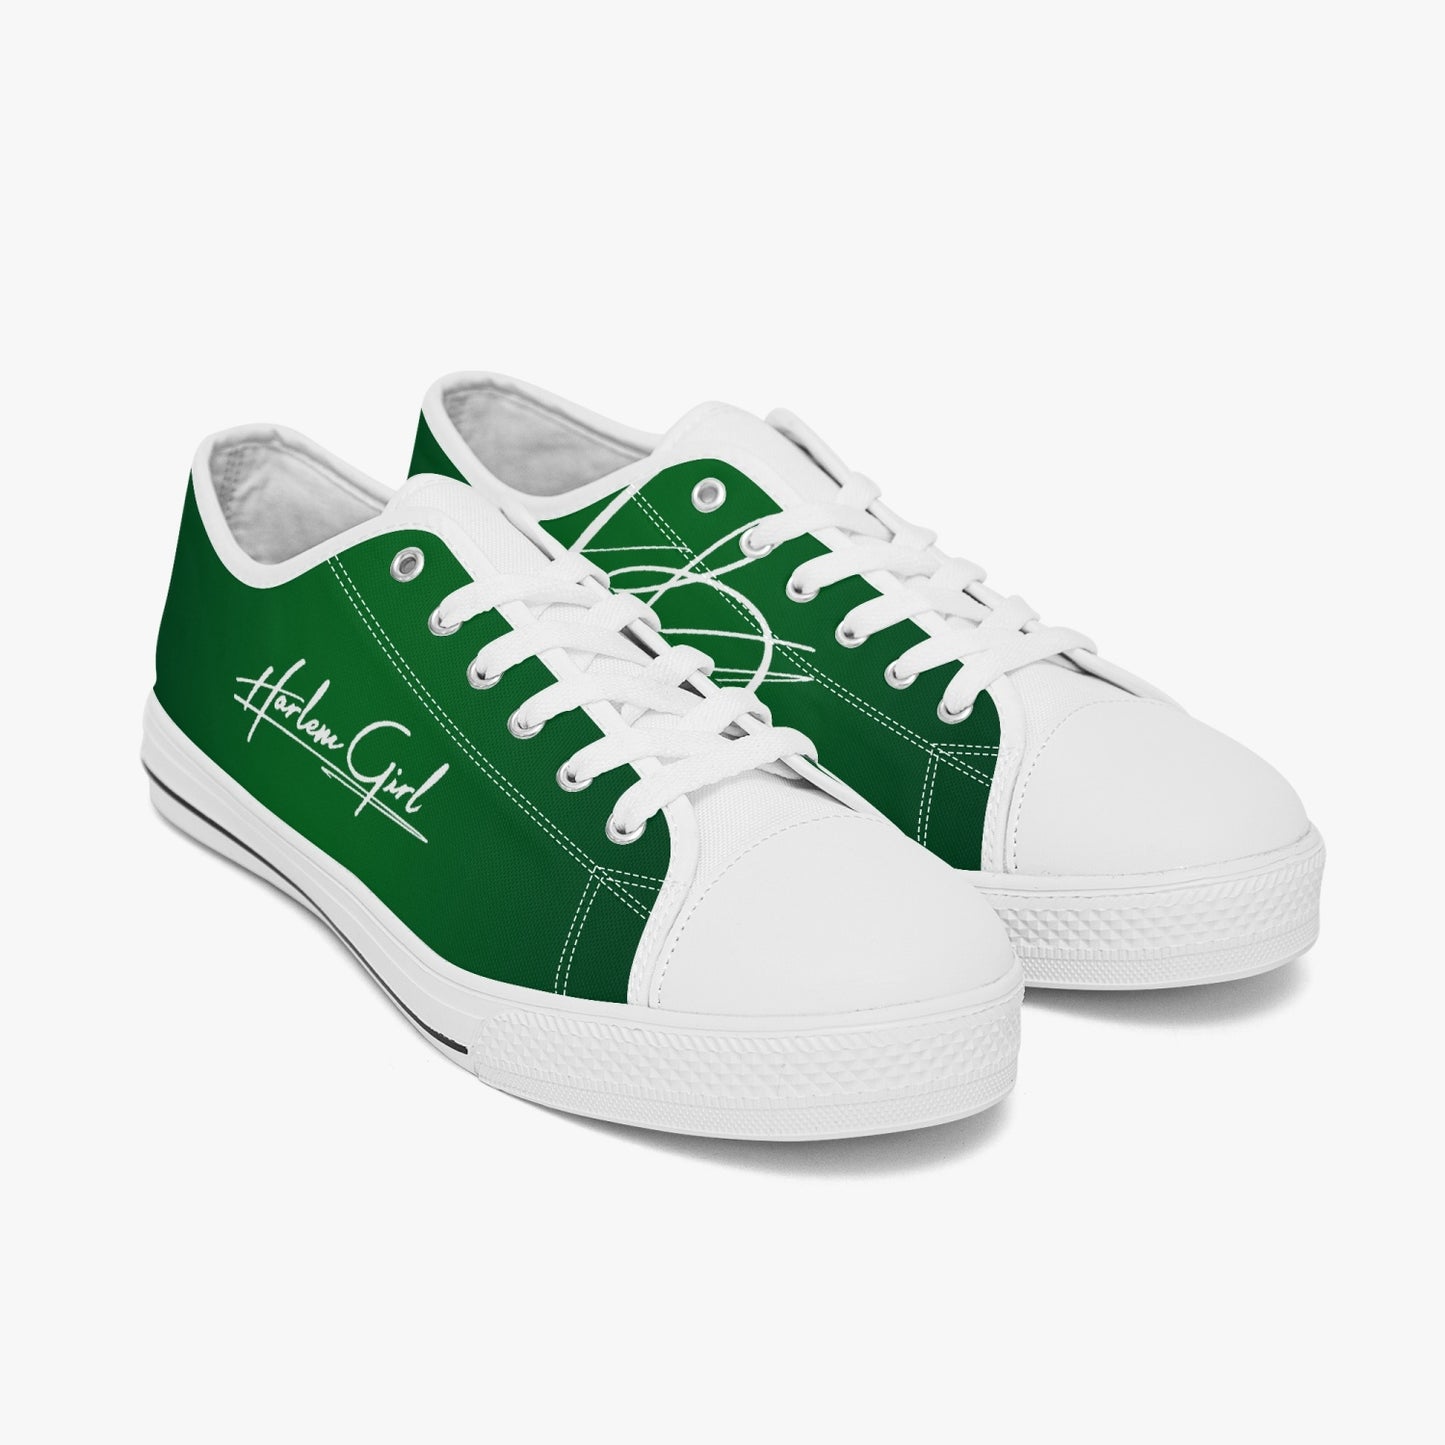 Harlem Girl "Coolee High" Womens Low-Top Canvas Sneaks - Emerald